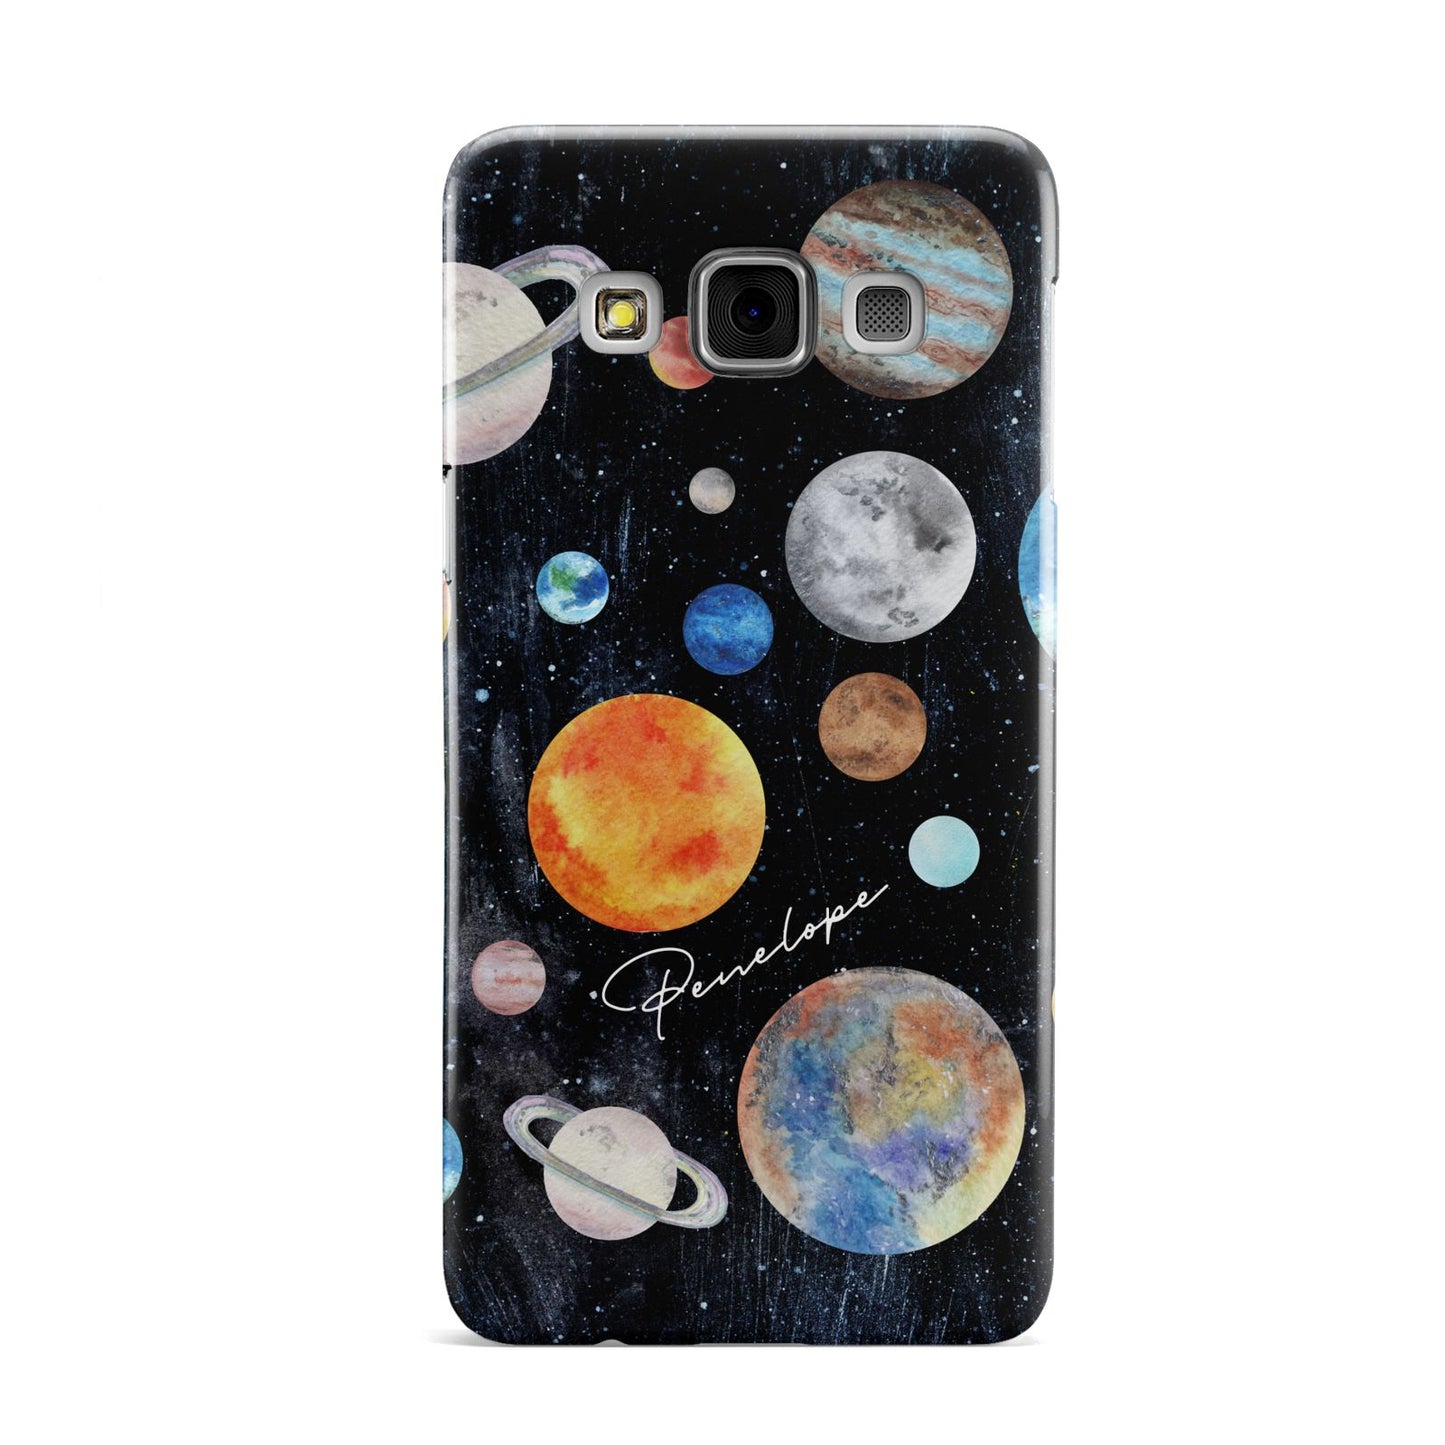 Personalised Planets Samsung Galaxy A3 Case